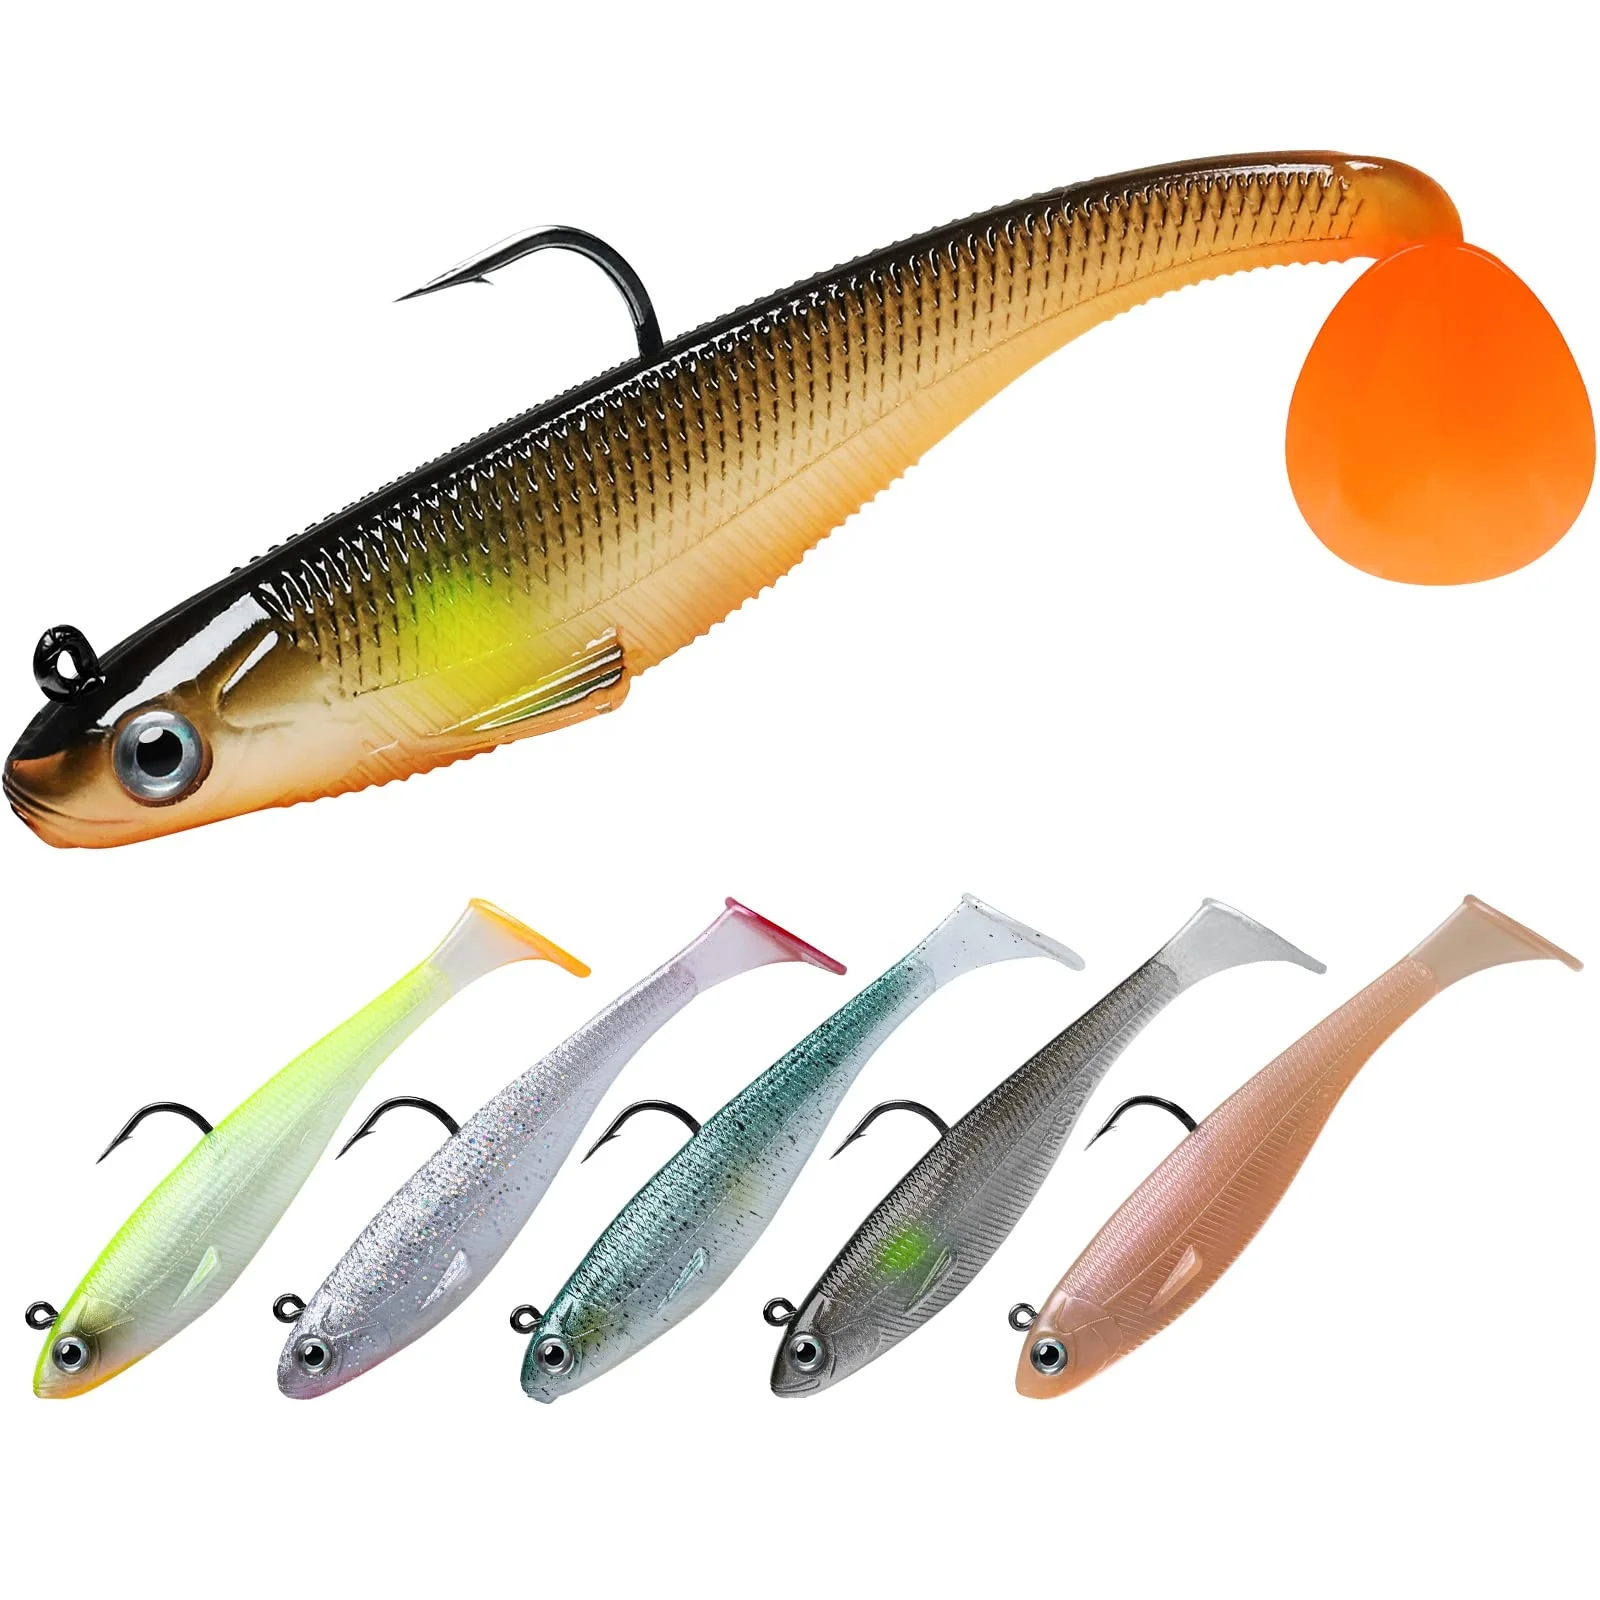 

TRUSCEND Pre-Rigged Jig Head Soft Fishing Lures Paddle Tail Swim baits for Bass Fishing Shad or Tadpole Lure with Fishing Bait, A-3.5"-0.45oz